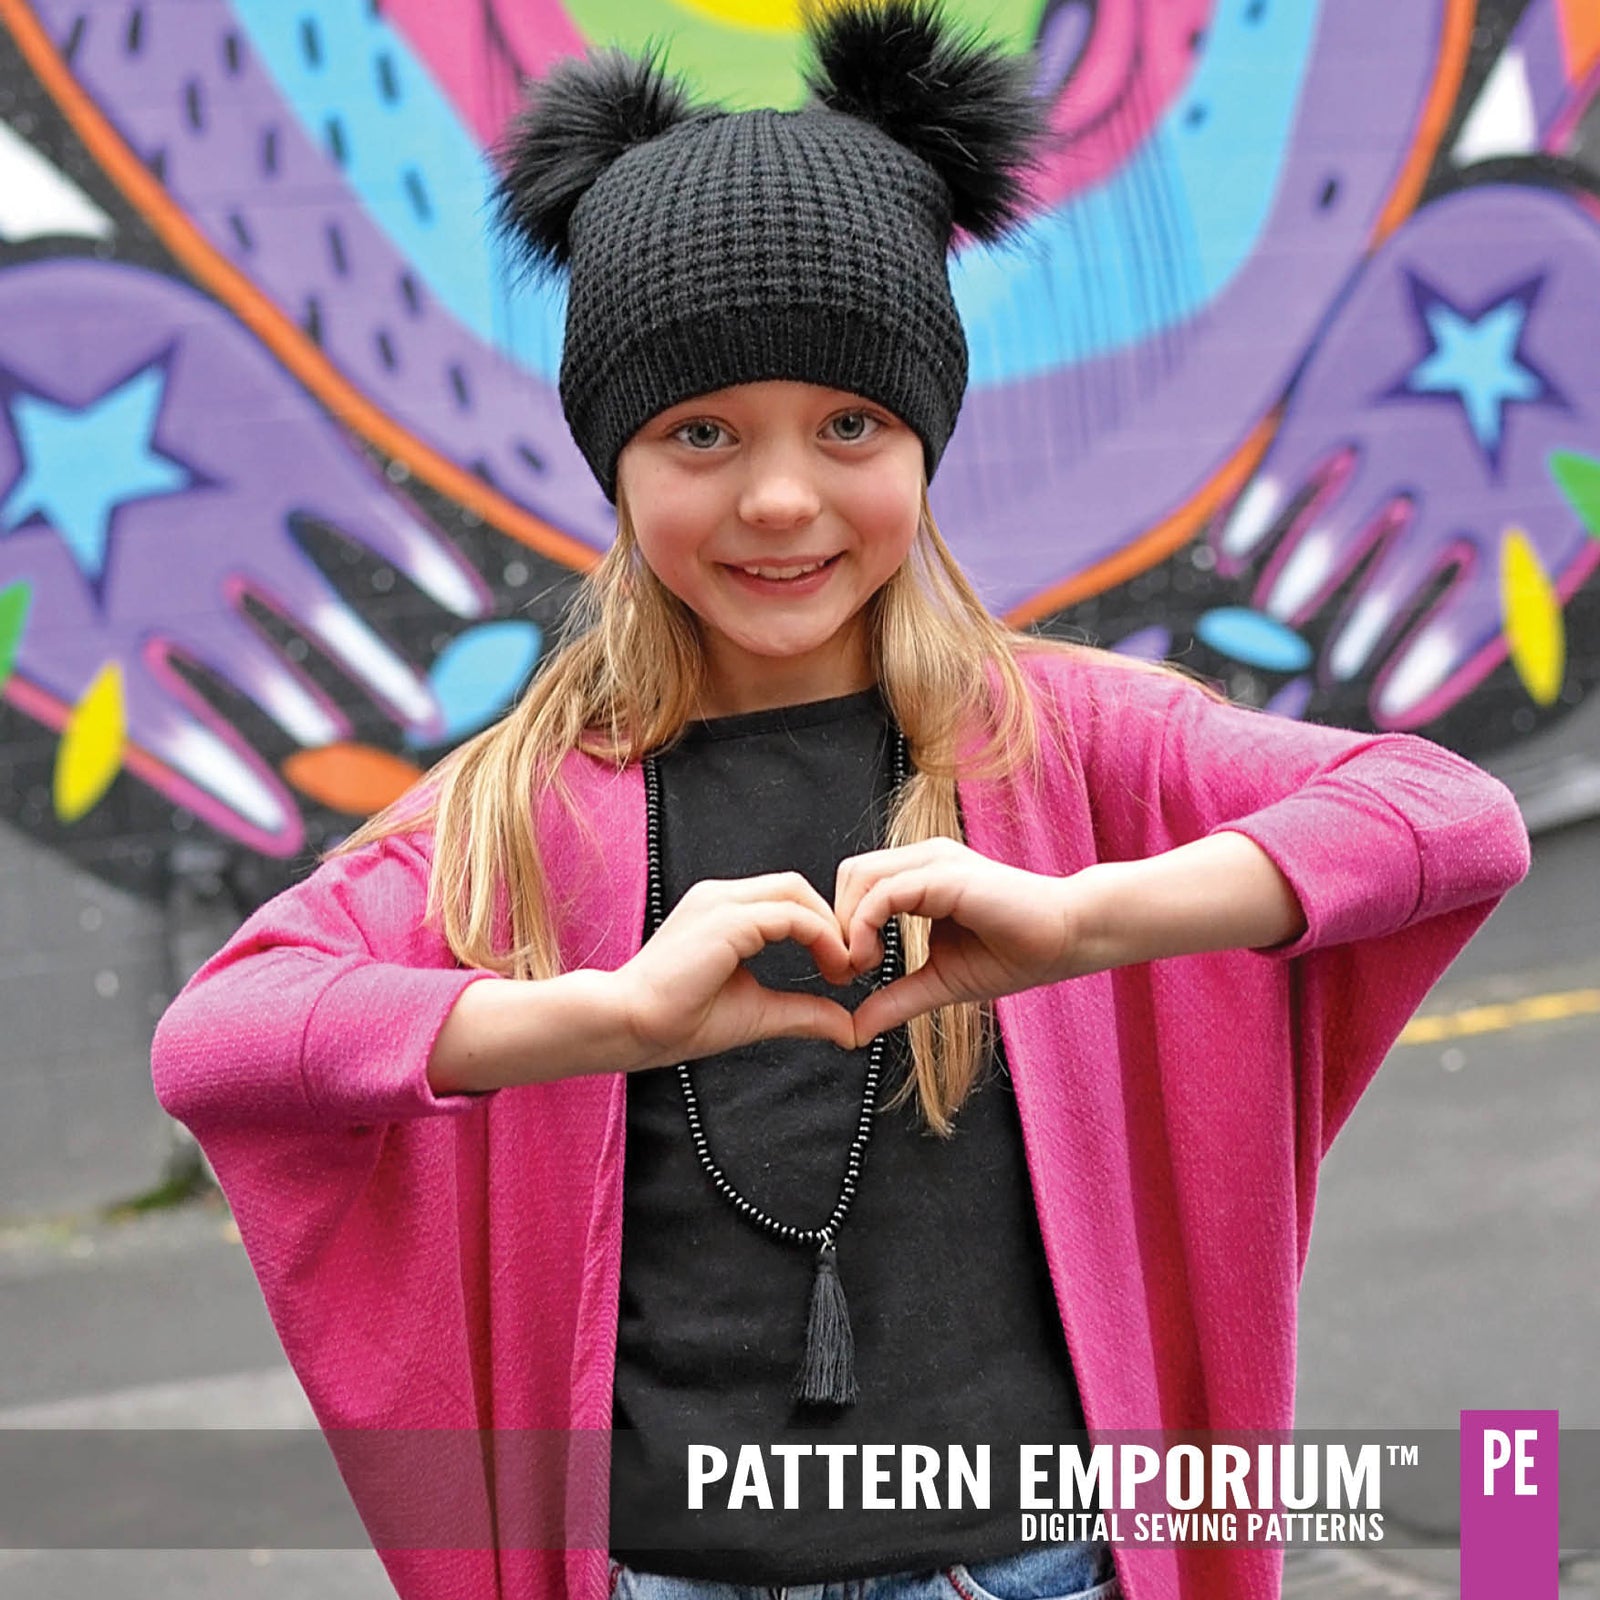 how-to-contact-pattern-emporium-online-pattern-emporium-pattern-emporium